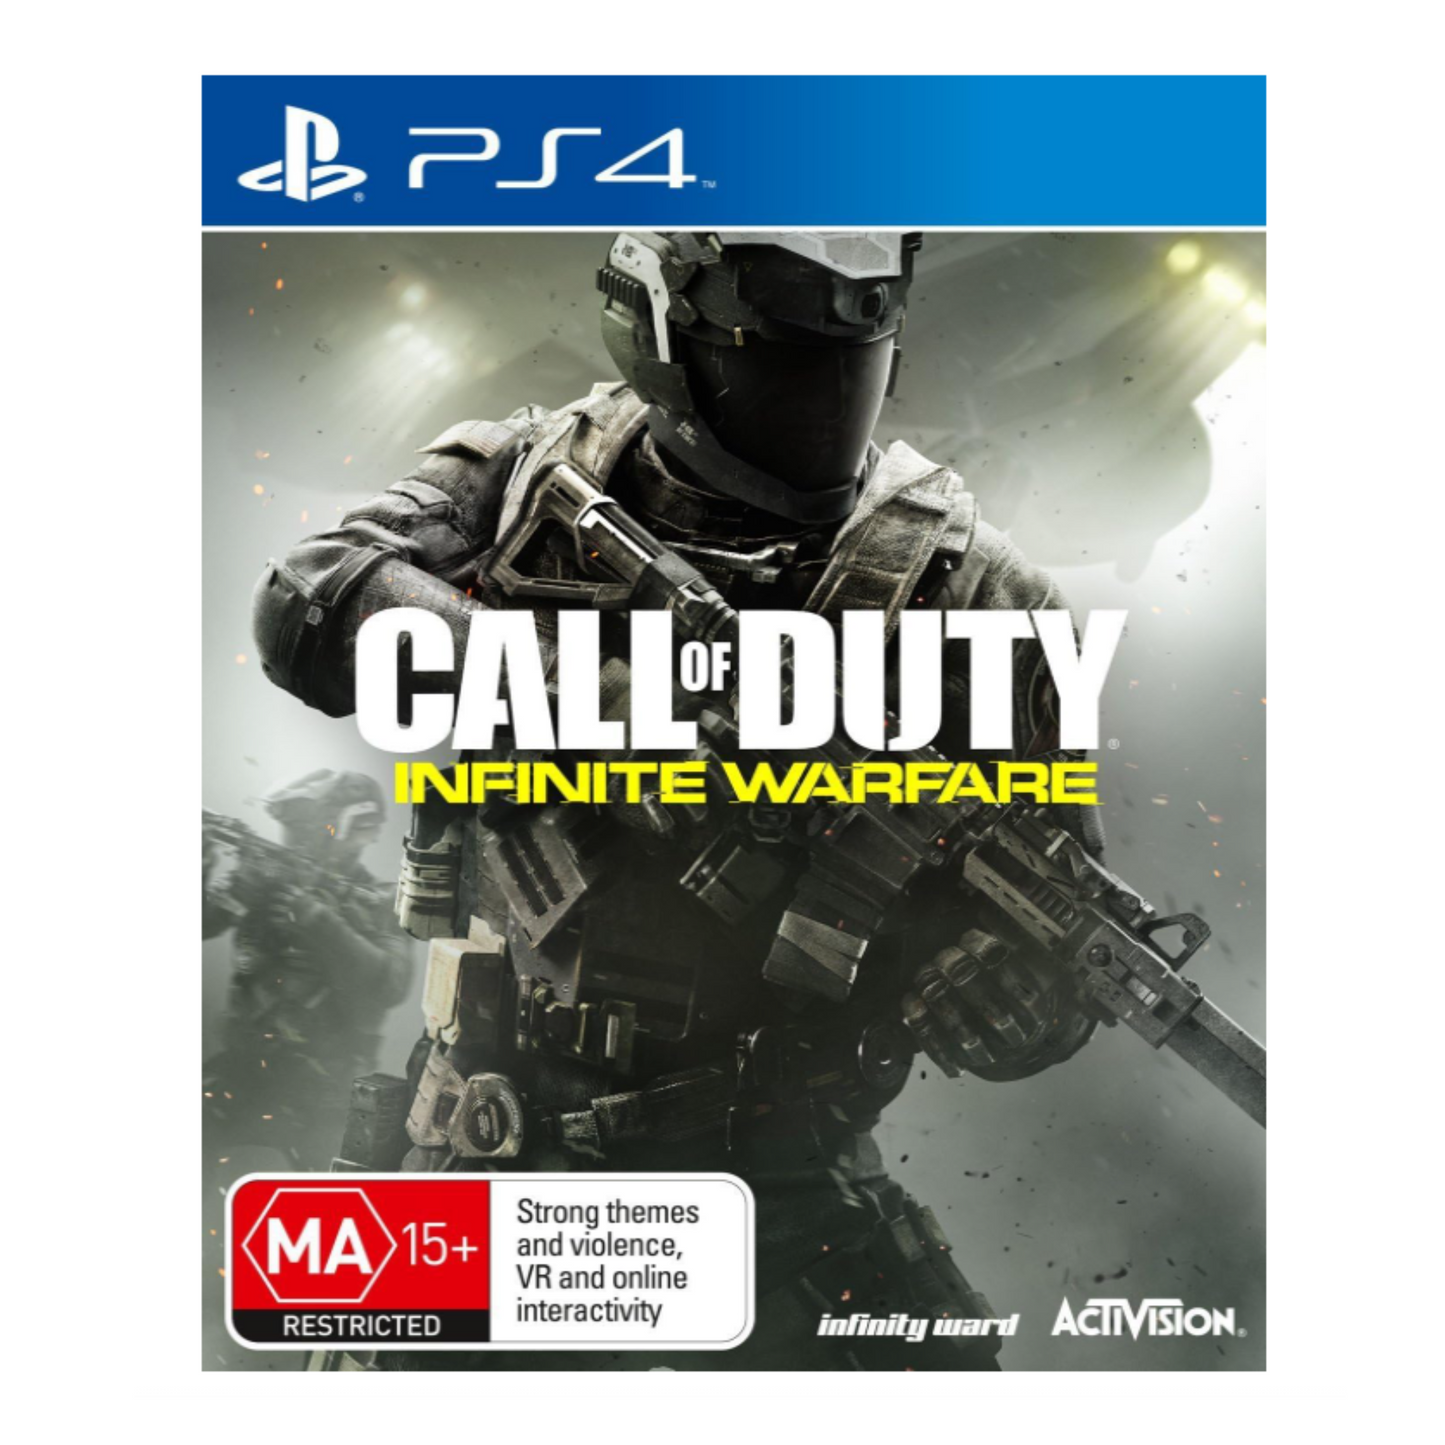 Call of Duty Infinite warfare video Game for playstation 4